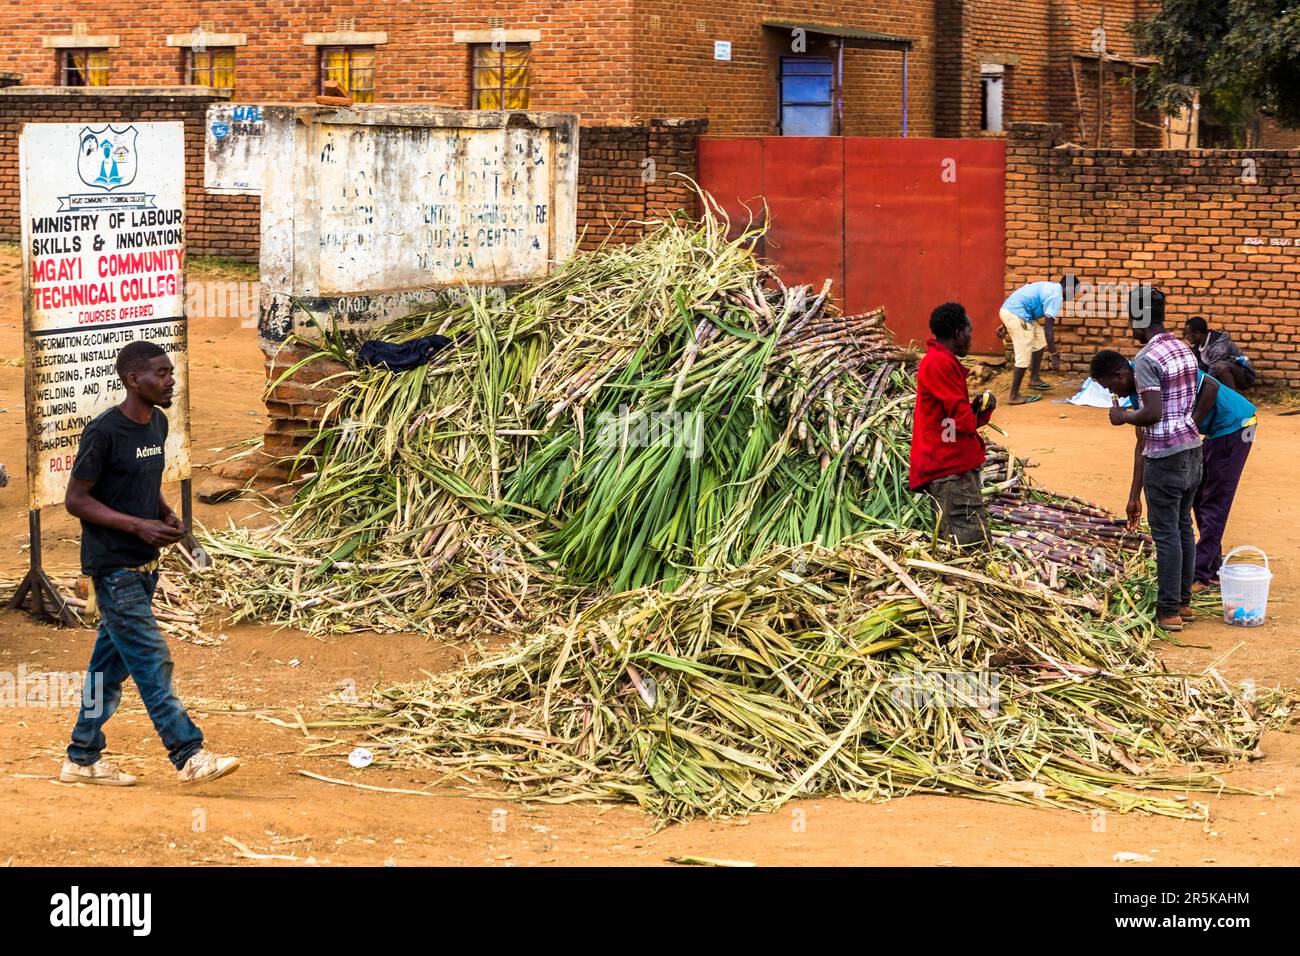 Street sale of sugar cane for immediate consumption in Nathenje, Malawi Stock Photo